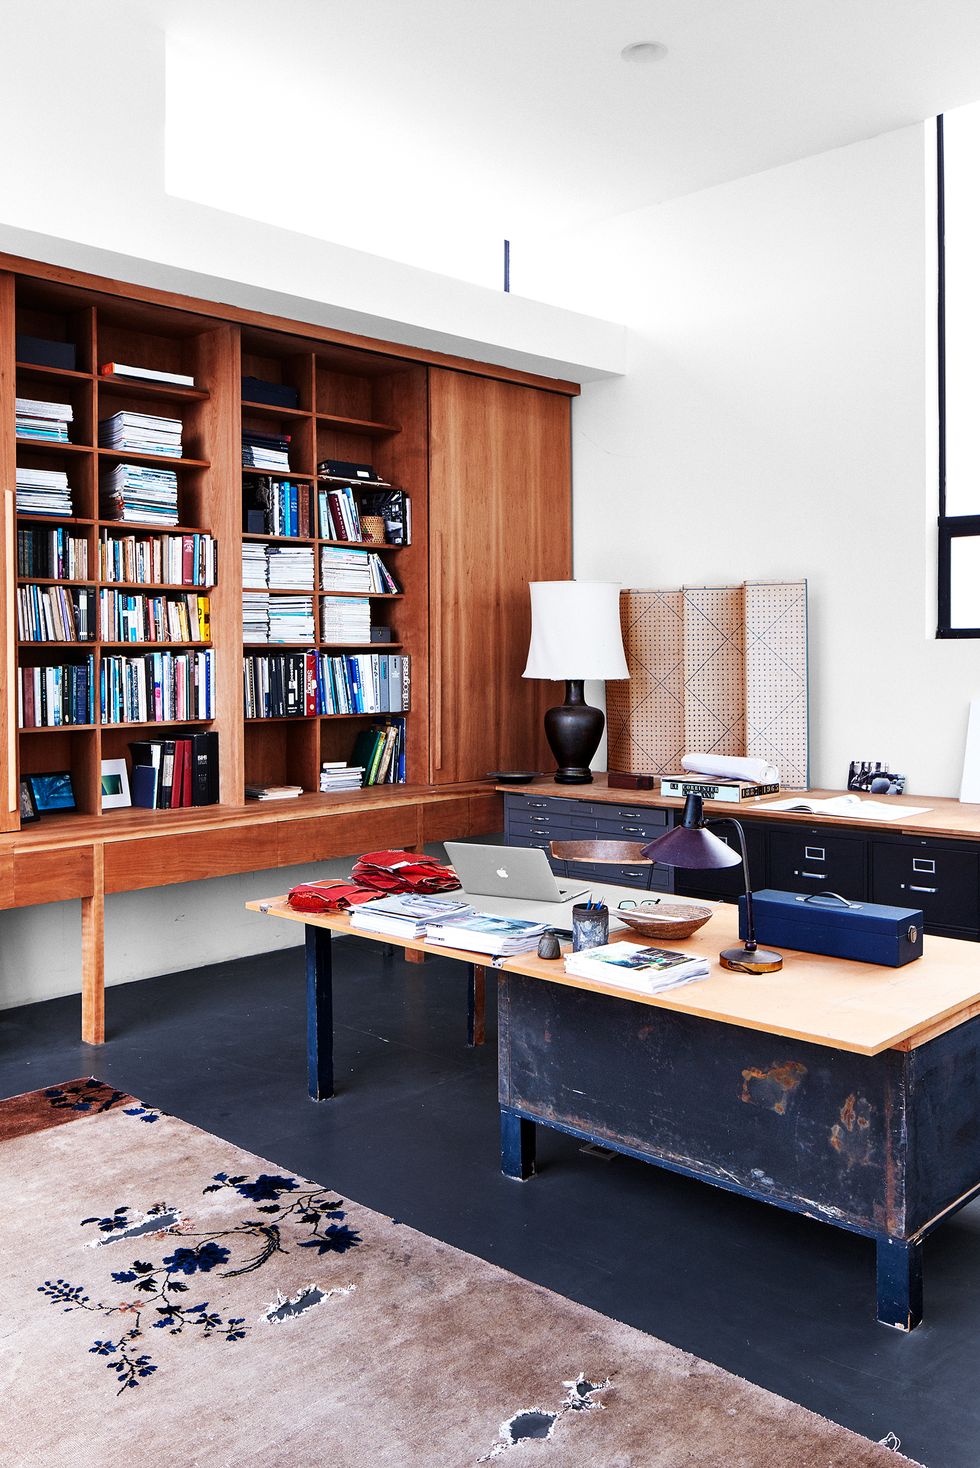 18 Gorgeous Rooms With Built-In Bookcases